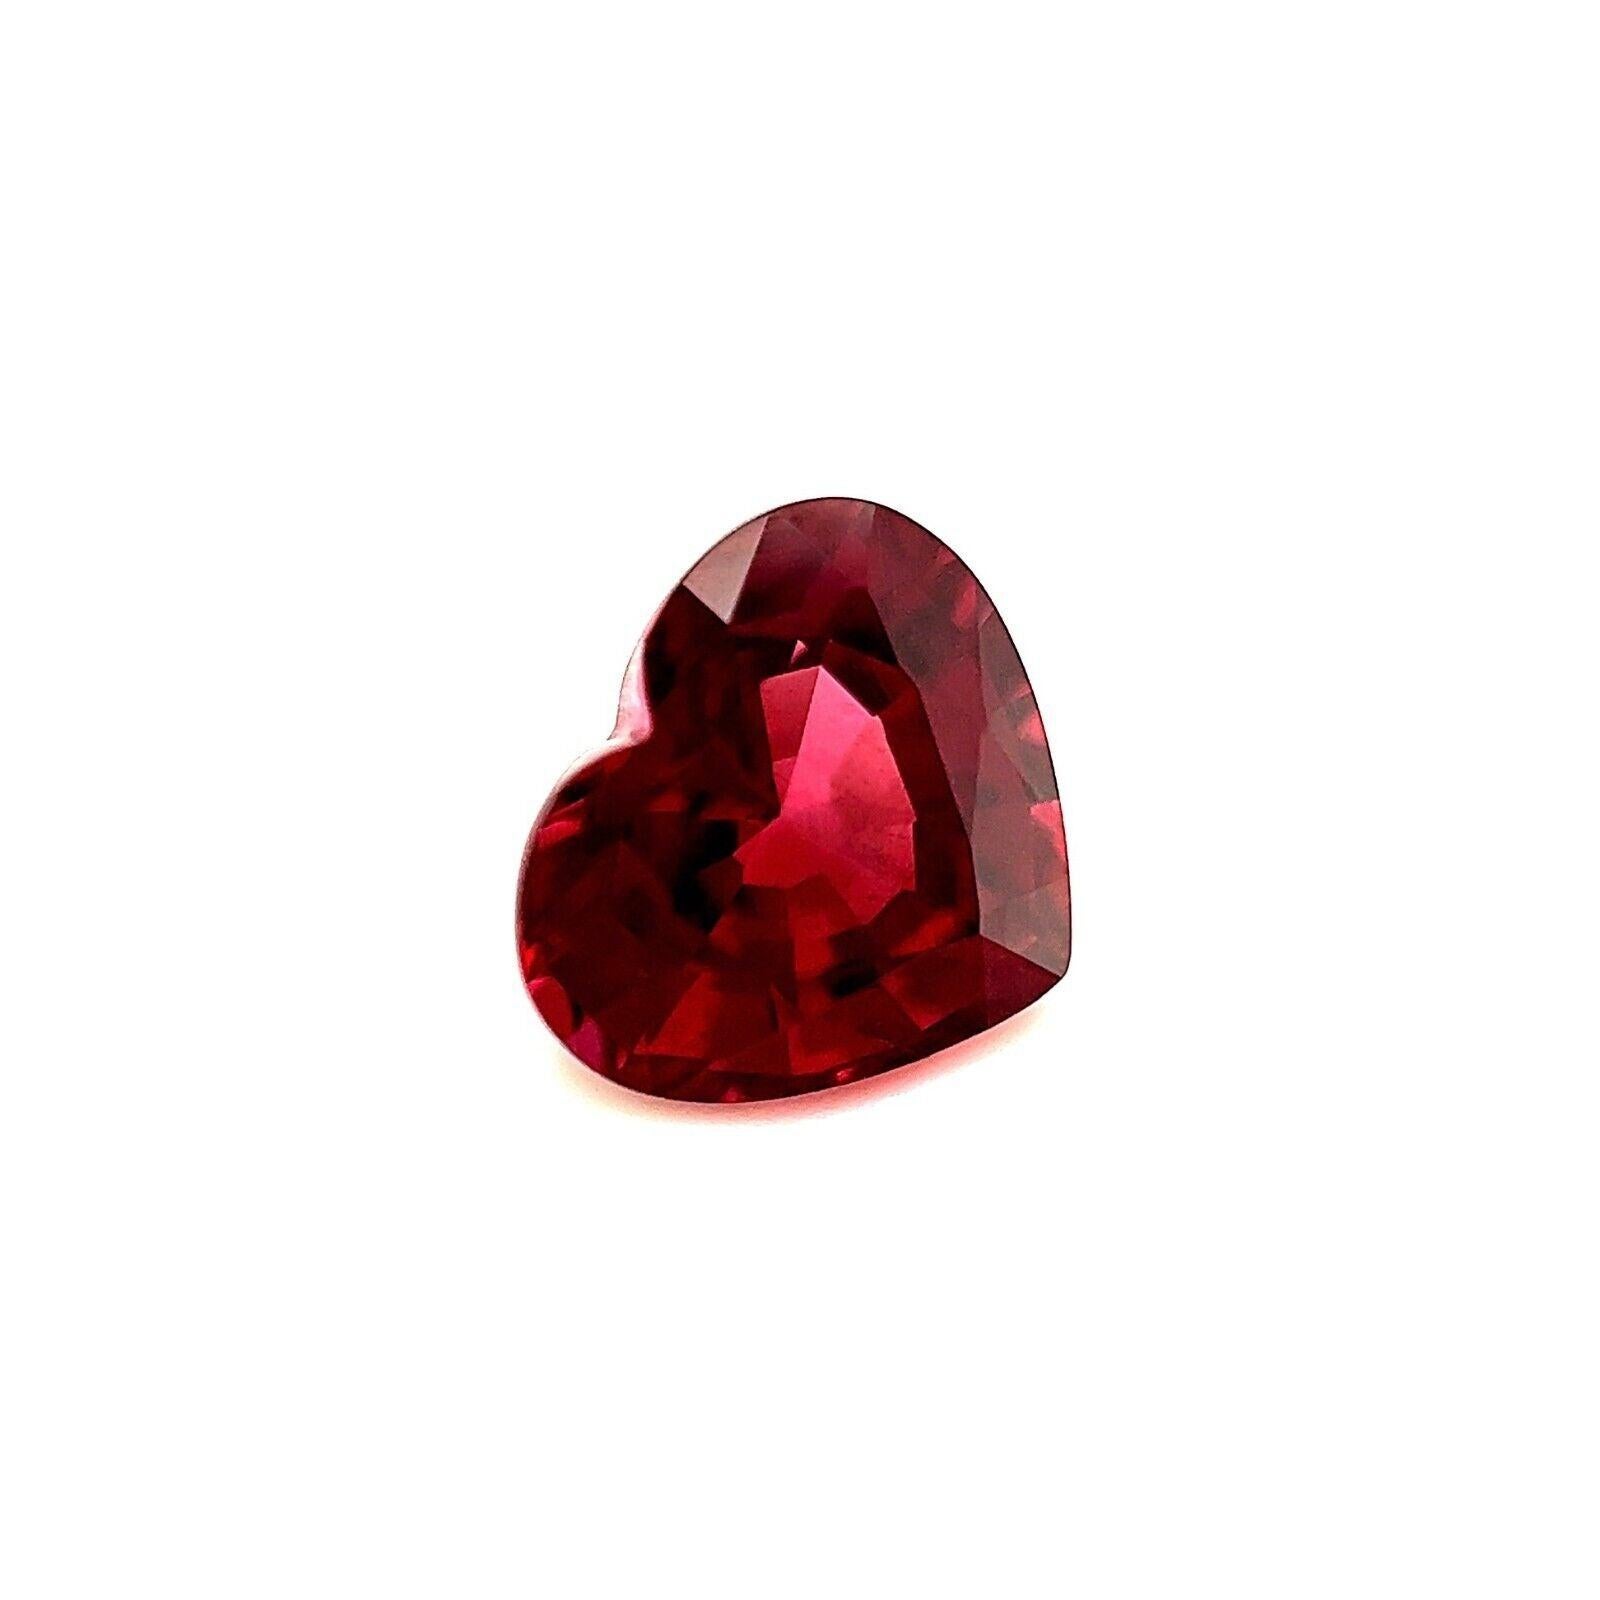 Fine 1.90ct Purplish Pink Rhodolite Garnet Heart Cut Loose Gemstone 7.8x6.7mm

Fine Natural Rhodolite Garnet Loose Gemstone.
1.90 Carat with a beautiful pink purplish colour and very good clarity.
This stone also has an excellent heart cut with good